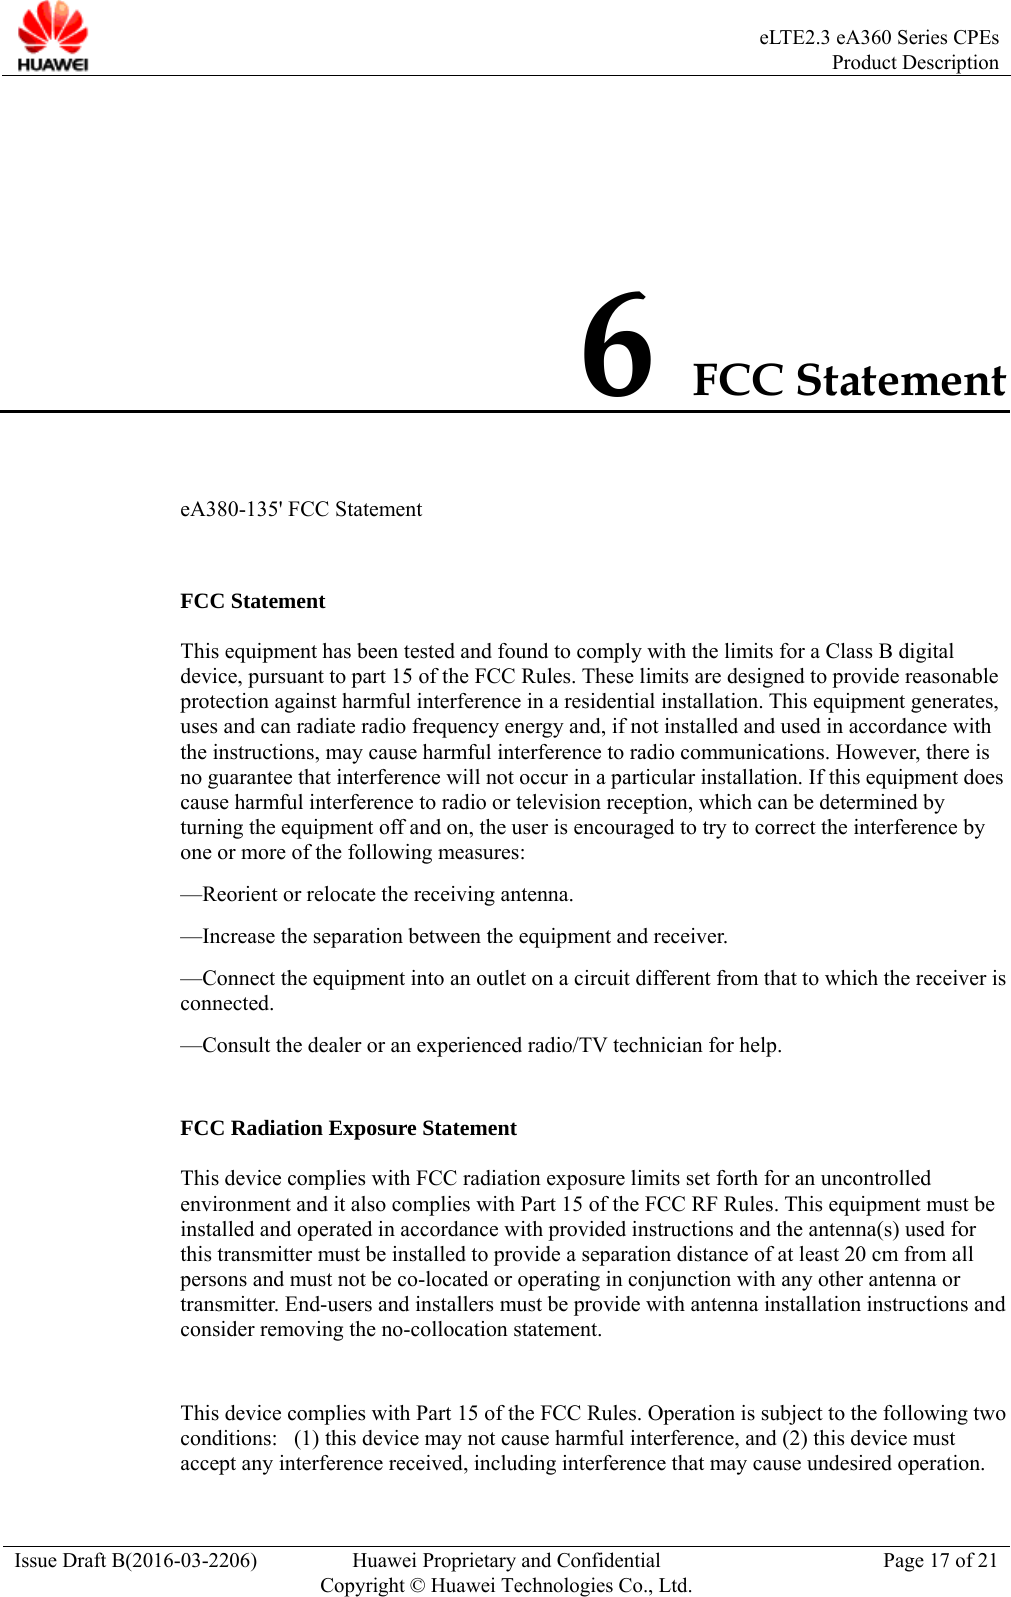  eLTE2.3 eA360 Series CPEsProduct Description Issue Draft B(2016-03-2206)  Huawei Proprietary and Confidential Copyright © Huawei Technologies Co., Ltd.Page 17 of 21 6 FCC Statement eA380-135&apos; FCC Statement  FCC Statement This equipment has been tested and found to comply with the limits for a Class B digital device, pursuant to part 15 of the FCC Rules. These limits are designed to provide reasonable protection against harmful interference in a residential installation. This equipment generates, uses and can radiate radio frequency energy and, if not installed and used in accordance with the instructions, may cause harmful interference to radio communications. However, there is no guarantee that interference will not occur in a particular installation. If this equipment does cause harmful interference to radio or television reception, which can be determined by turning the equipment off and on, the user is encouraged to try to correct the interference by one or more of the following measures:   —Reorient or relocate the receiving antenna. —Increase the separation between the equipment and receiver.   —Connect the equipment into an outlet on a circuit different from that to which the receiver is connected.  —Consult the dealer or an experienced radio/TV technician for help.    FCC Radiation Exposure Statement   This device complies with FCC radiation exposure limits set forth for an uncontrolled environment and it also complies with Part 15 of the FCC RF Rules. This equipment must be installed and operated in accordance with provided instructions and the antenna(s) used for this transmitter must be installed to provide a separation distance of at least 20 cm from all persons and must not be co-located or operating in conjunction with any other antenna or transmitter. End-users and installers must be provide with antenna installation instructions and consider removing the no-collocation statement.  This device complies with Part 15 of the FCC Rules. Operation is subject to the following two conditions:   (1) this device may not cause harmful interference, and (2) this device must accept any interference received, including interference that may cause undesired operation. 